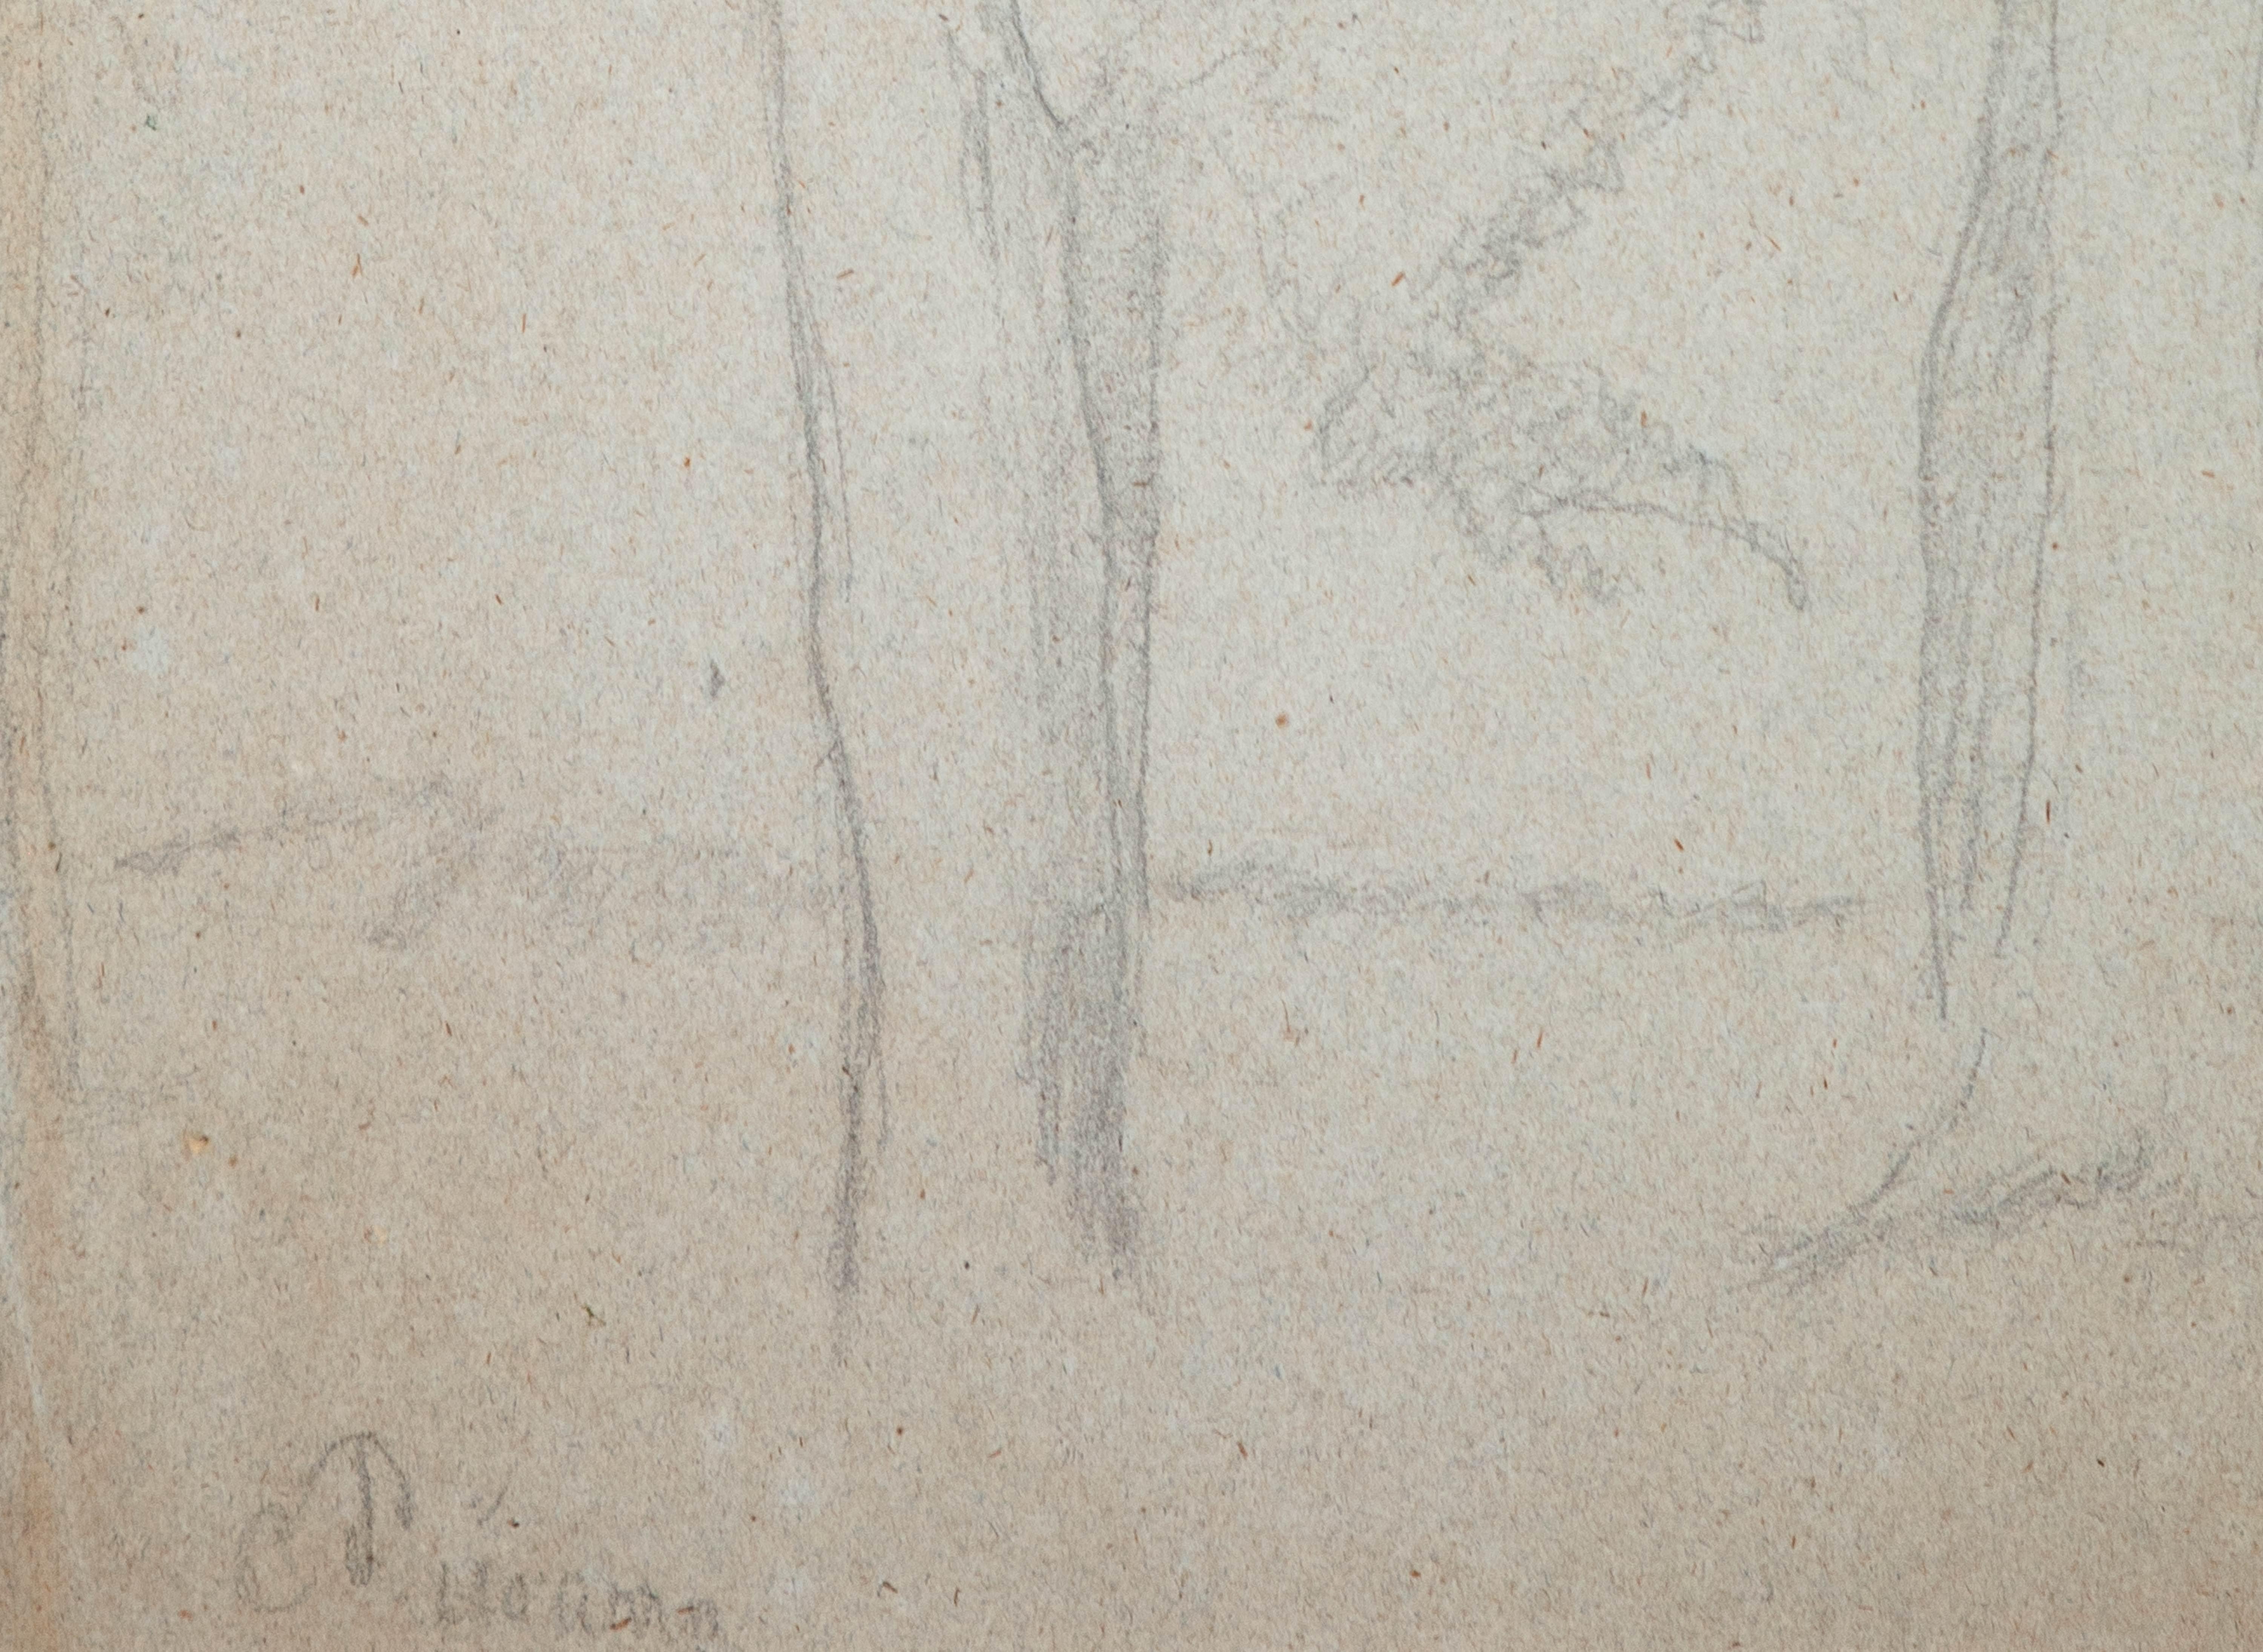 Arbres by Camille Pissarro - Pencil on paper For Sale 4